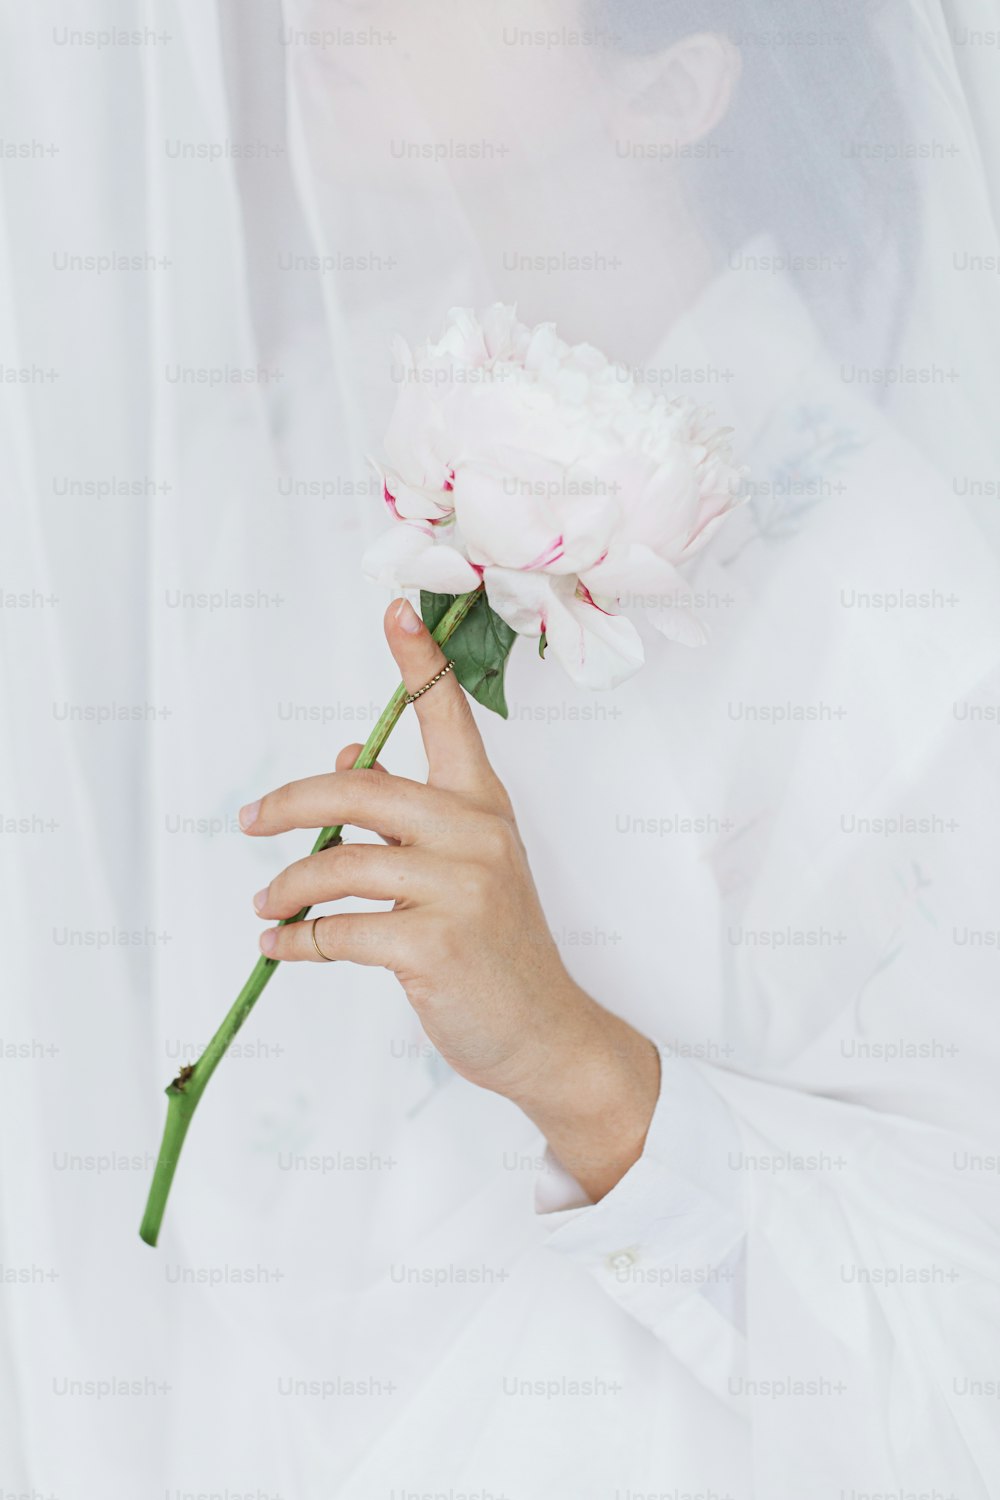 Sensual beautiful woman behind soft white fabric with pink peony in hands. Young stylish female gently holding big pink peony flower. Tender image. Spring aesthetics. Bridal morning